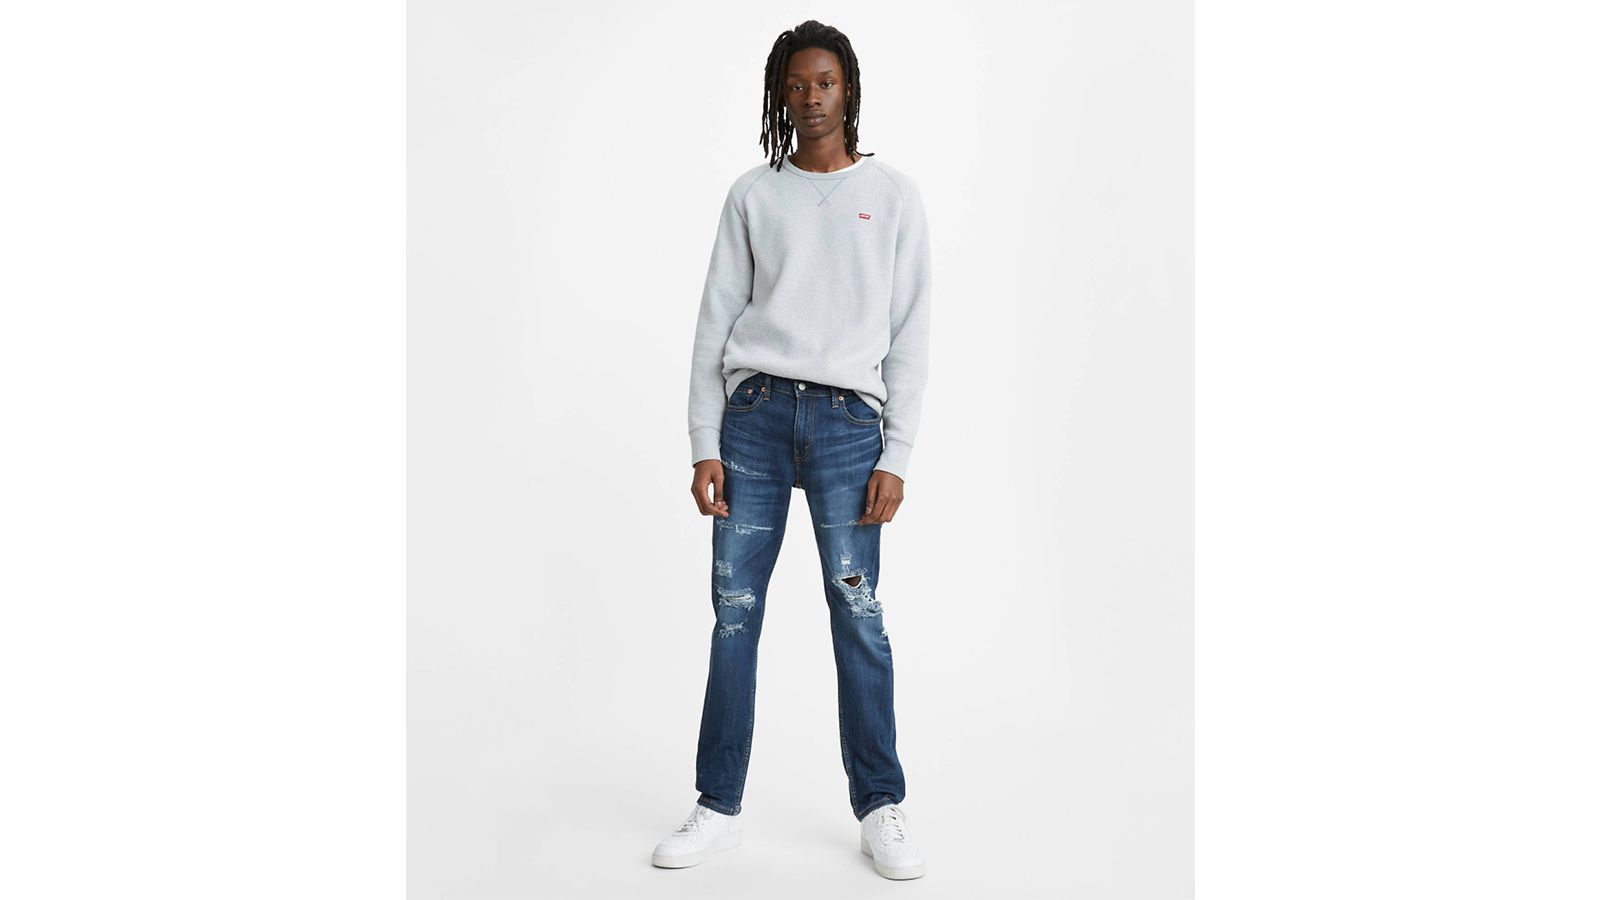 Levi's sale: Take 40% off jeans, jackets and more | CNN Underscored